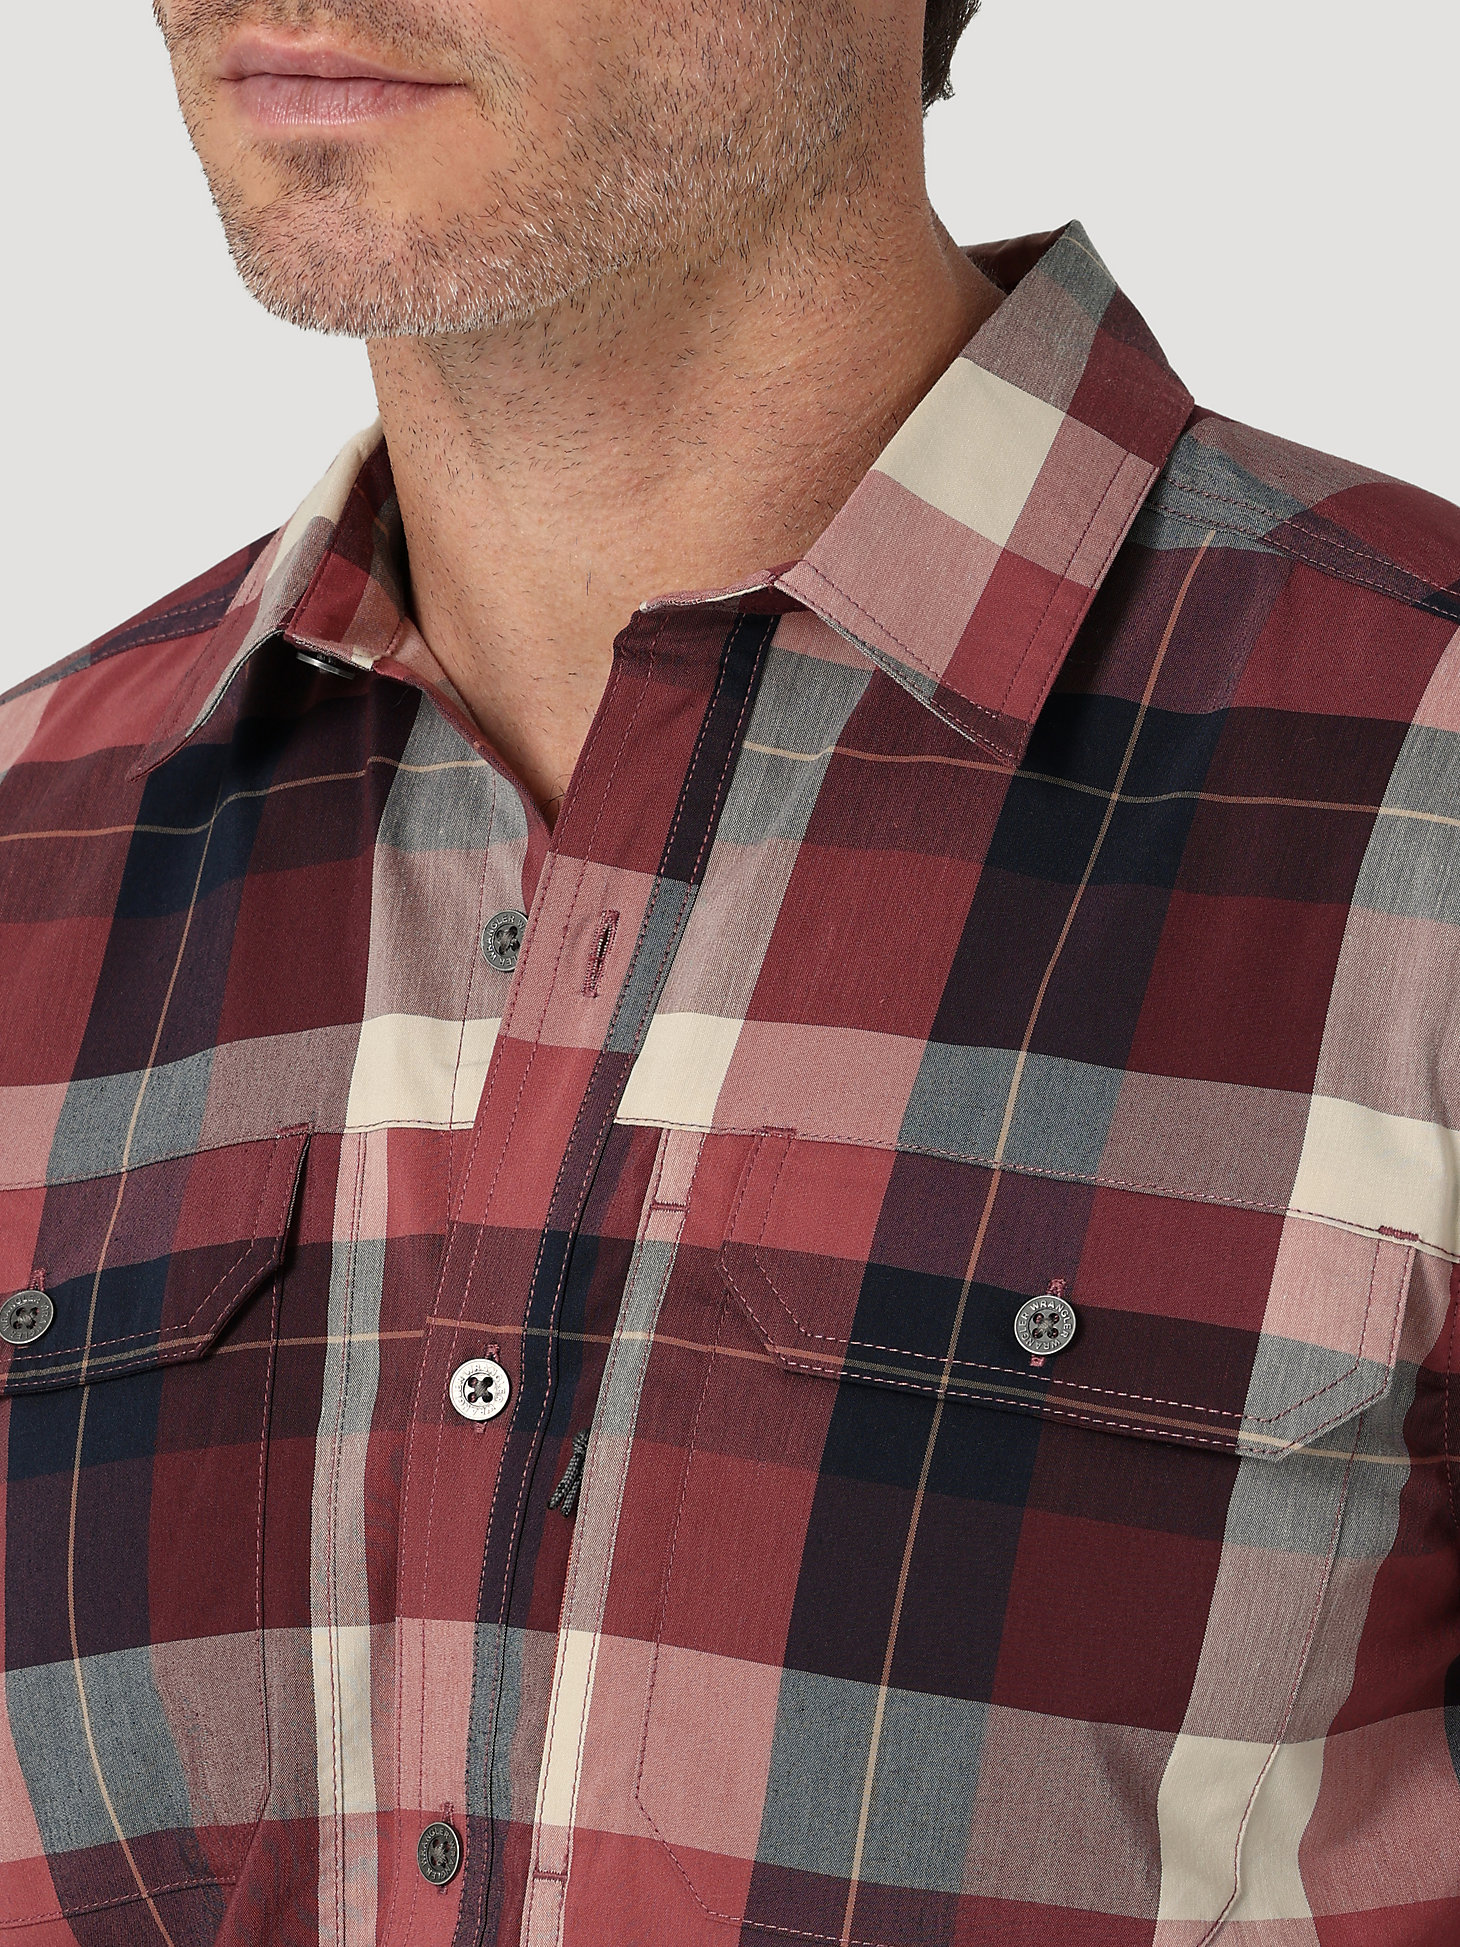 ATG By Wrangler™ Plaid Mixed Material Shirt in Beagle Apple Butter alternative view 4